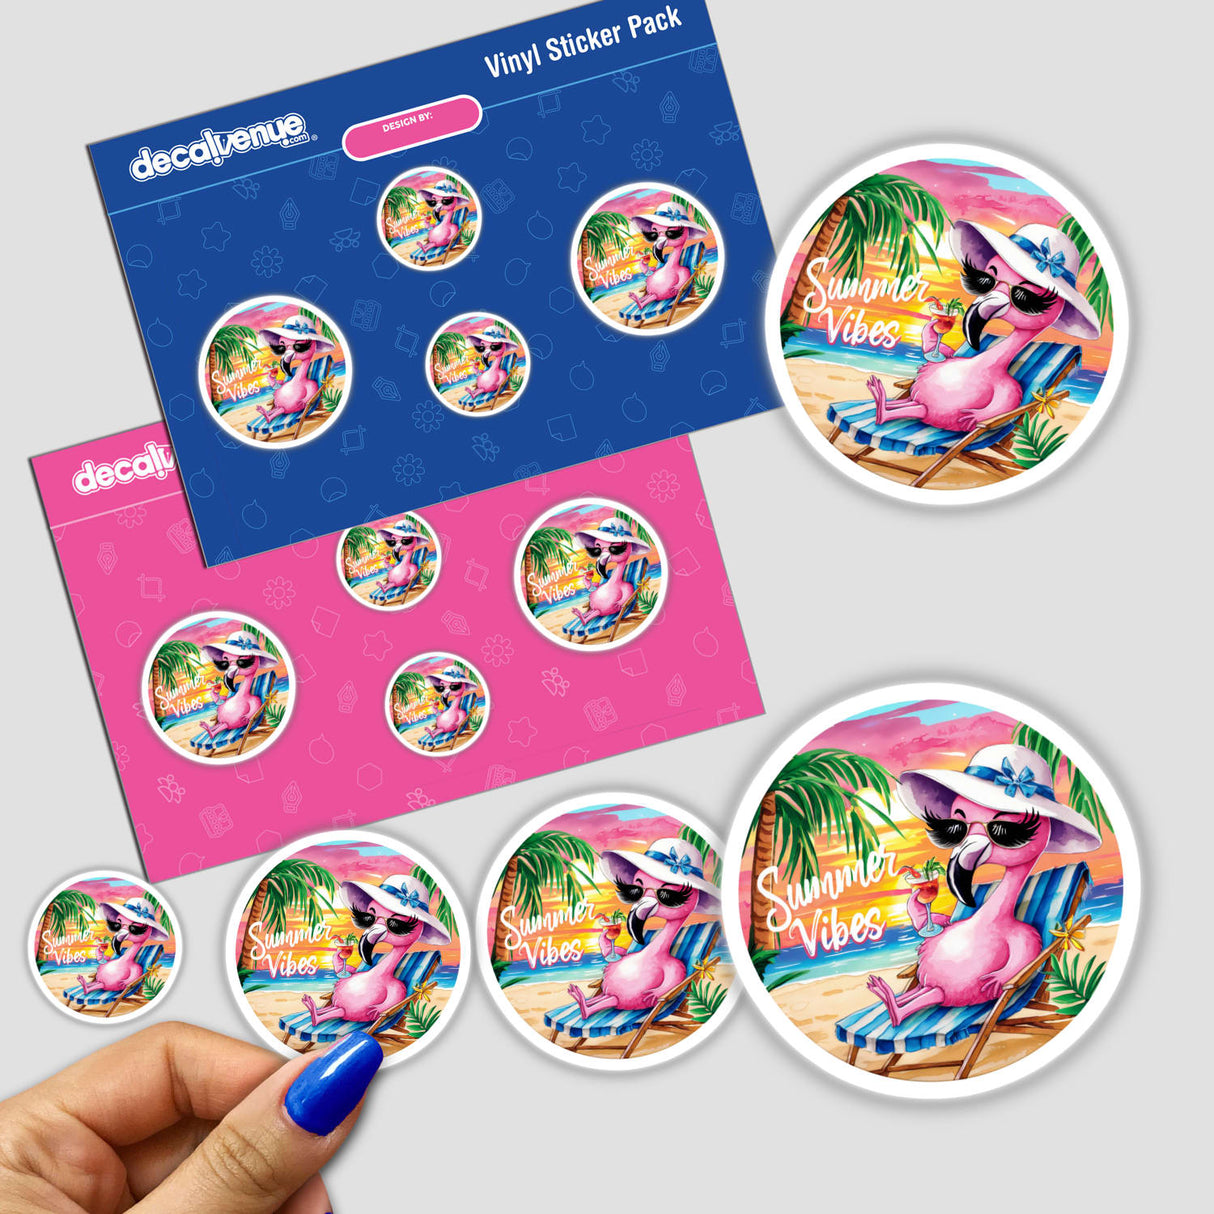 Colorful watercolor sticker pack with tropical flamingo designs, featuring a variety of round stickers depicting a relaxed flamingo bird surrounded by palm trees and vibrant summer vibes.